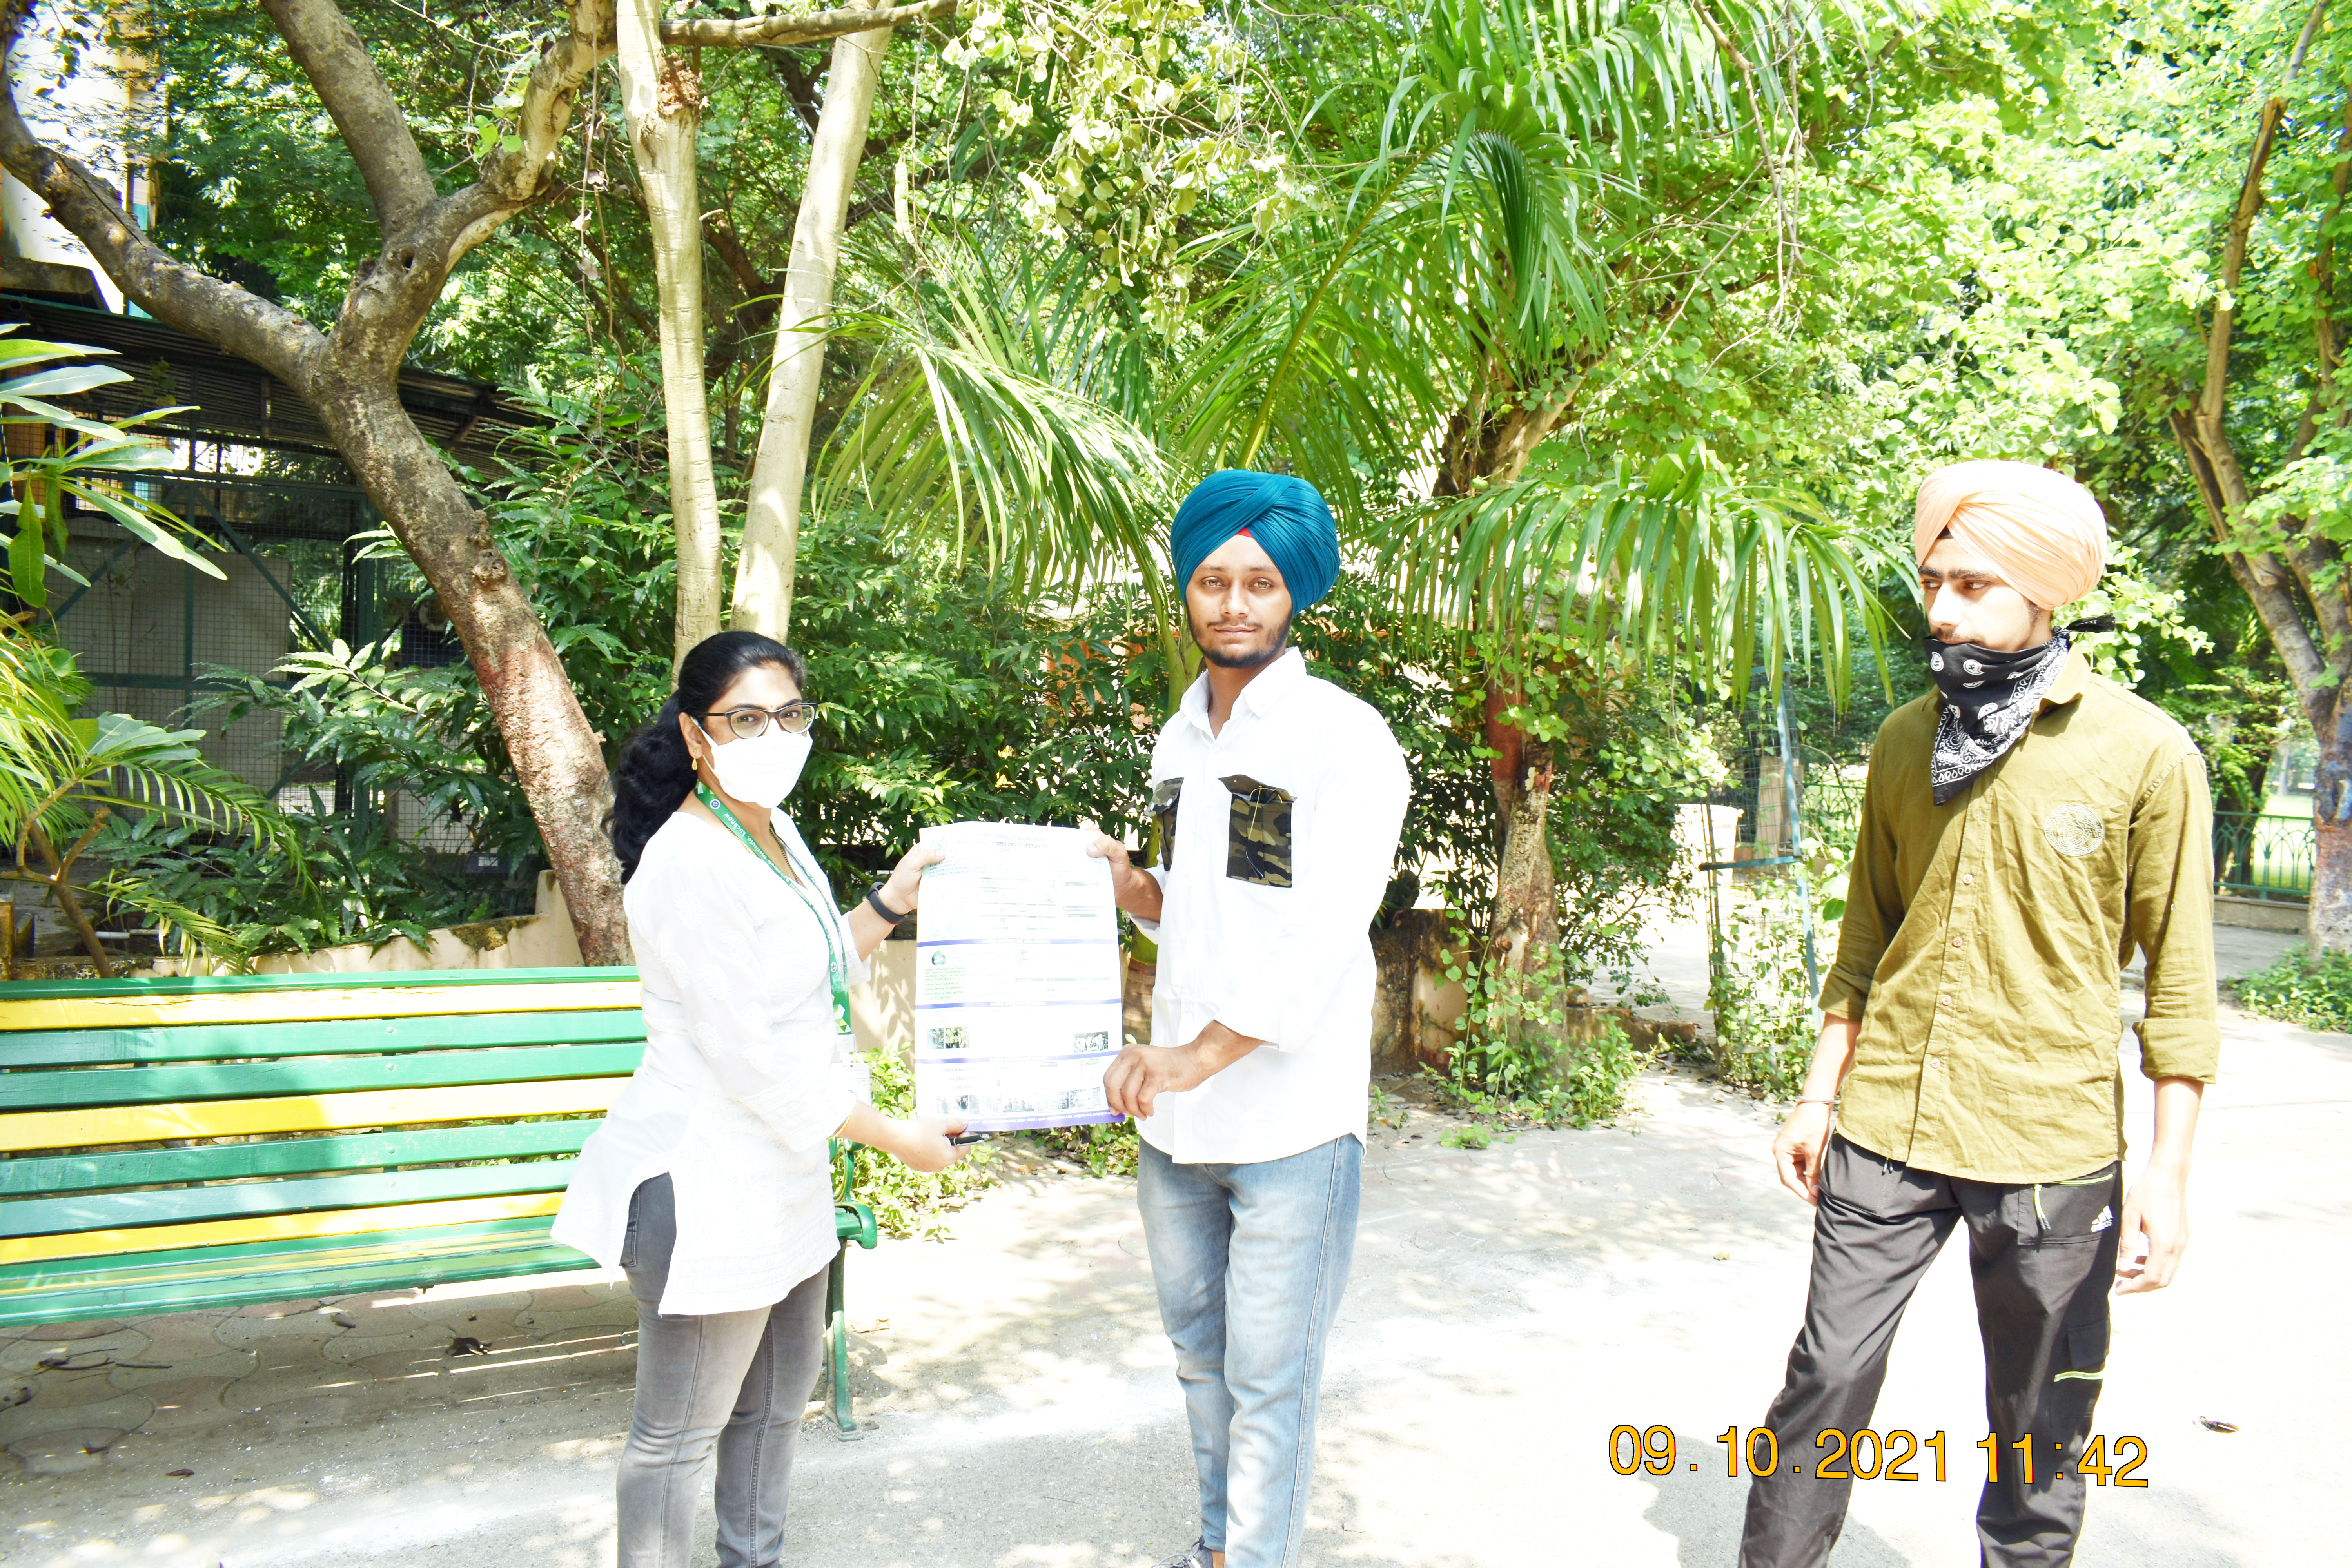 Campaign against single use plastics in Lucknow, Zoological Park